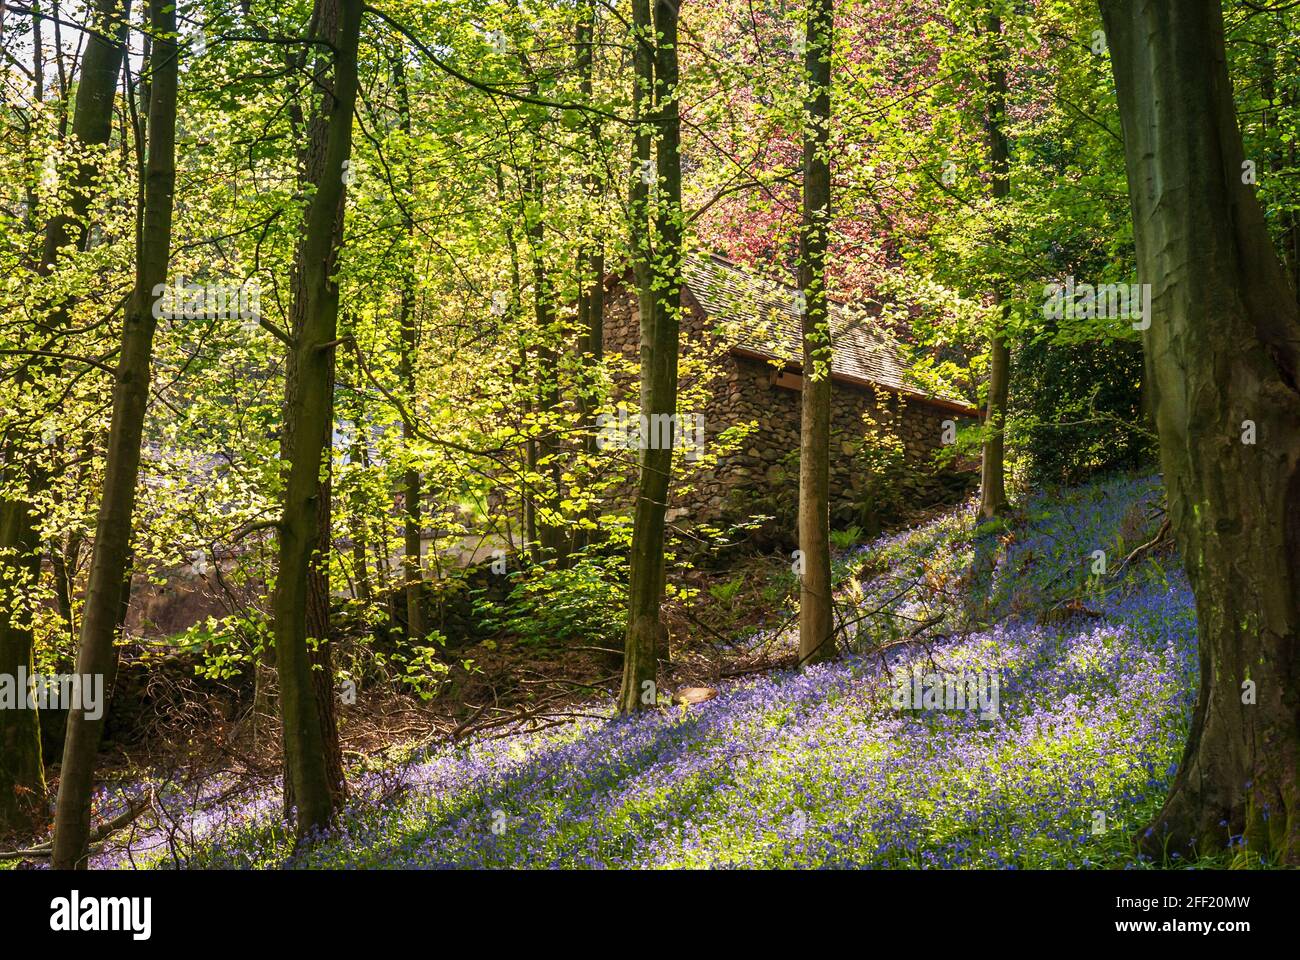 A sunlit, spring, 3 shot HDR image of the Bluebells, Hyacinthoides non-scripta in Stanley Wood, Duddon, Cumbria, England. 29 April 2007 Stock Photo